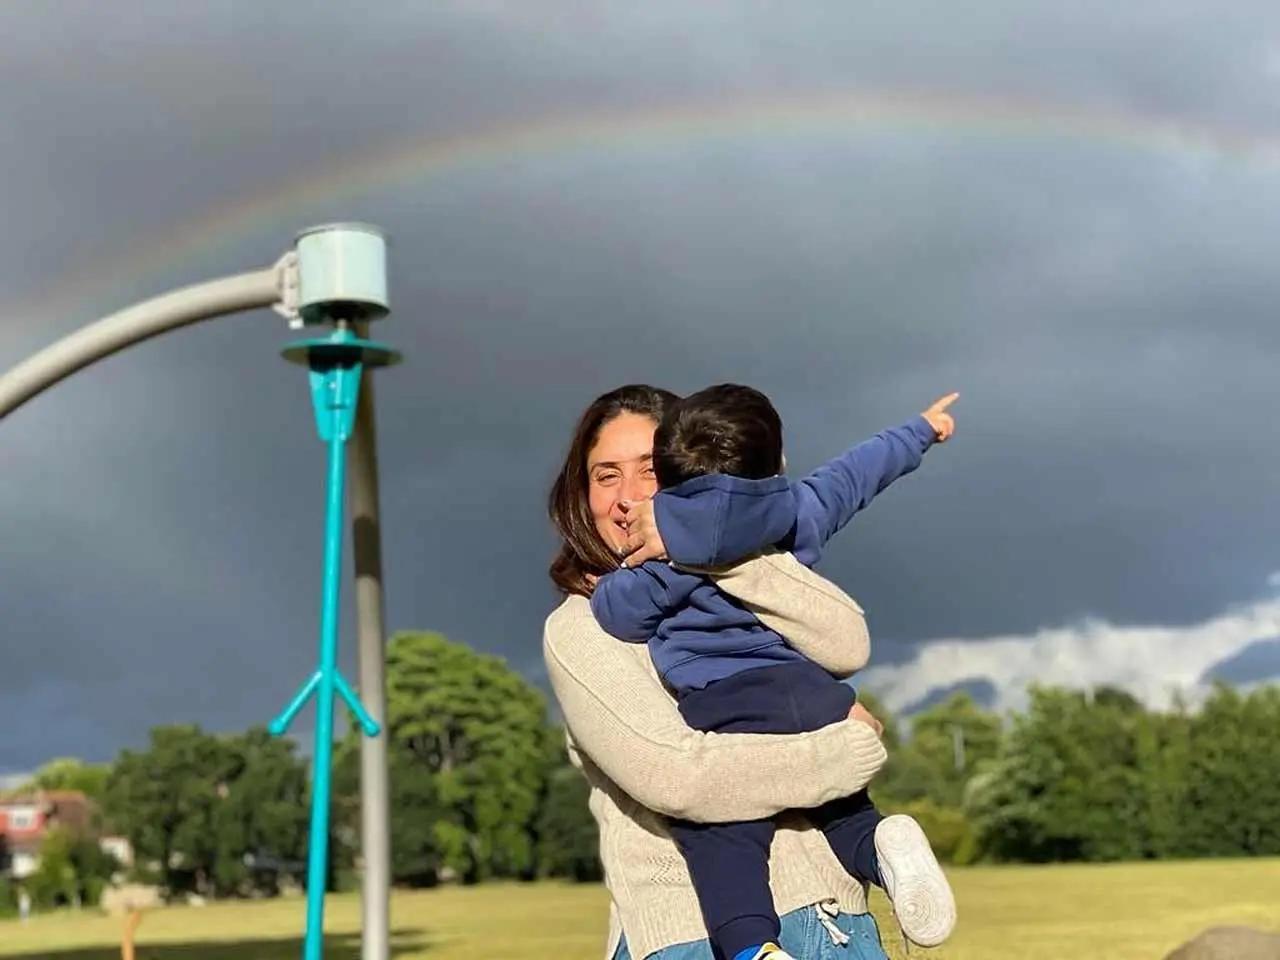 Kareena Kapoor Khan shared a pretty picture with Jeh baba where the duo is seen enjoying a rainbow in England